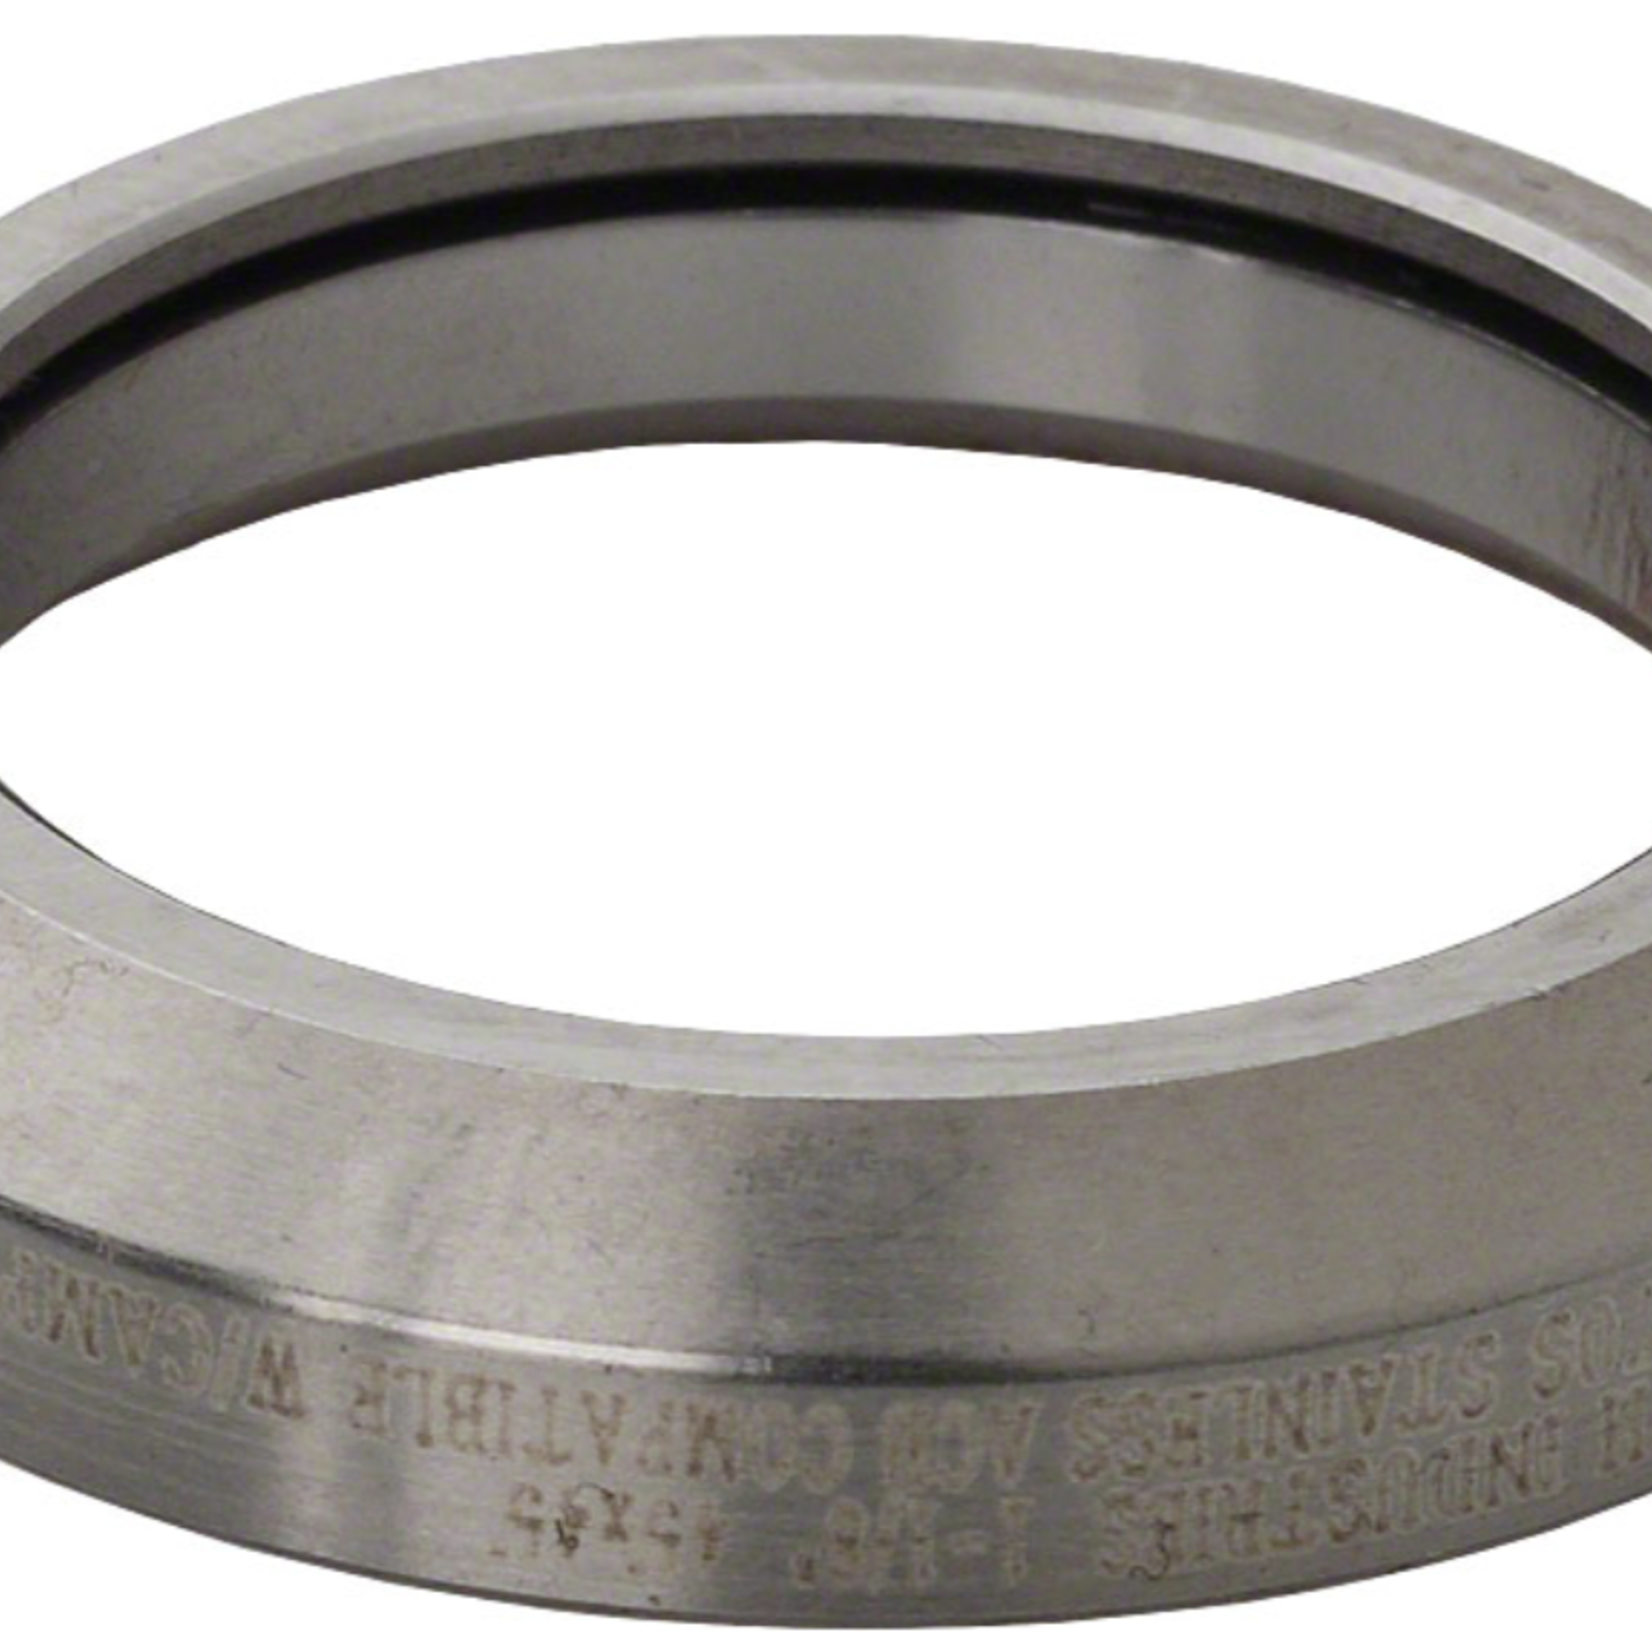 Full Speed Ahead Full Speed Ahead Micro ACBBlue/Gray Seal Headset Bearing 45x45 Stainless 1-1/8"